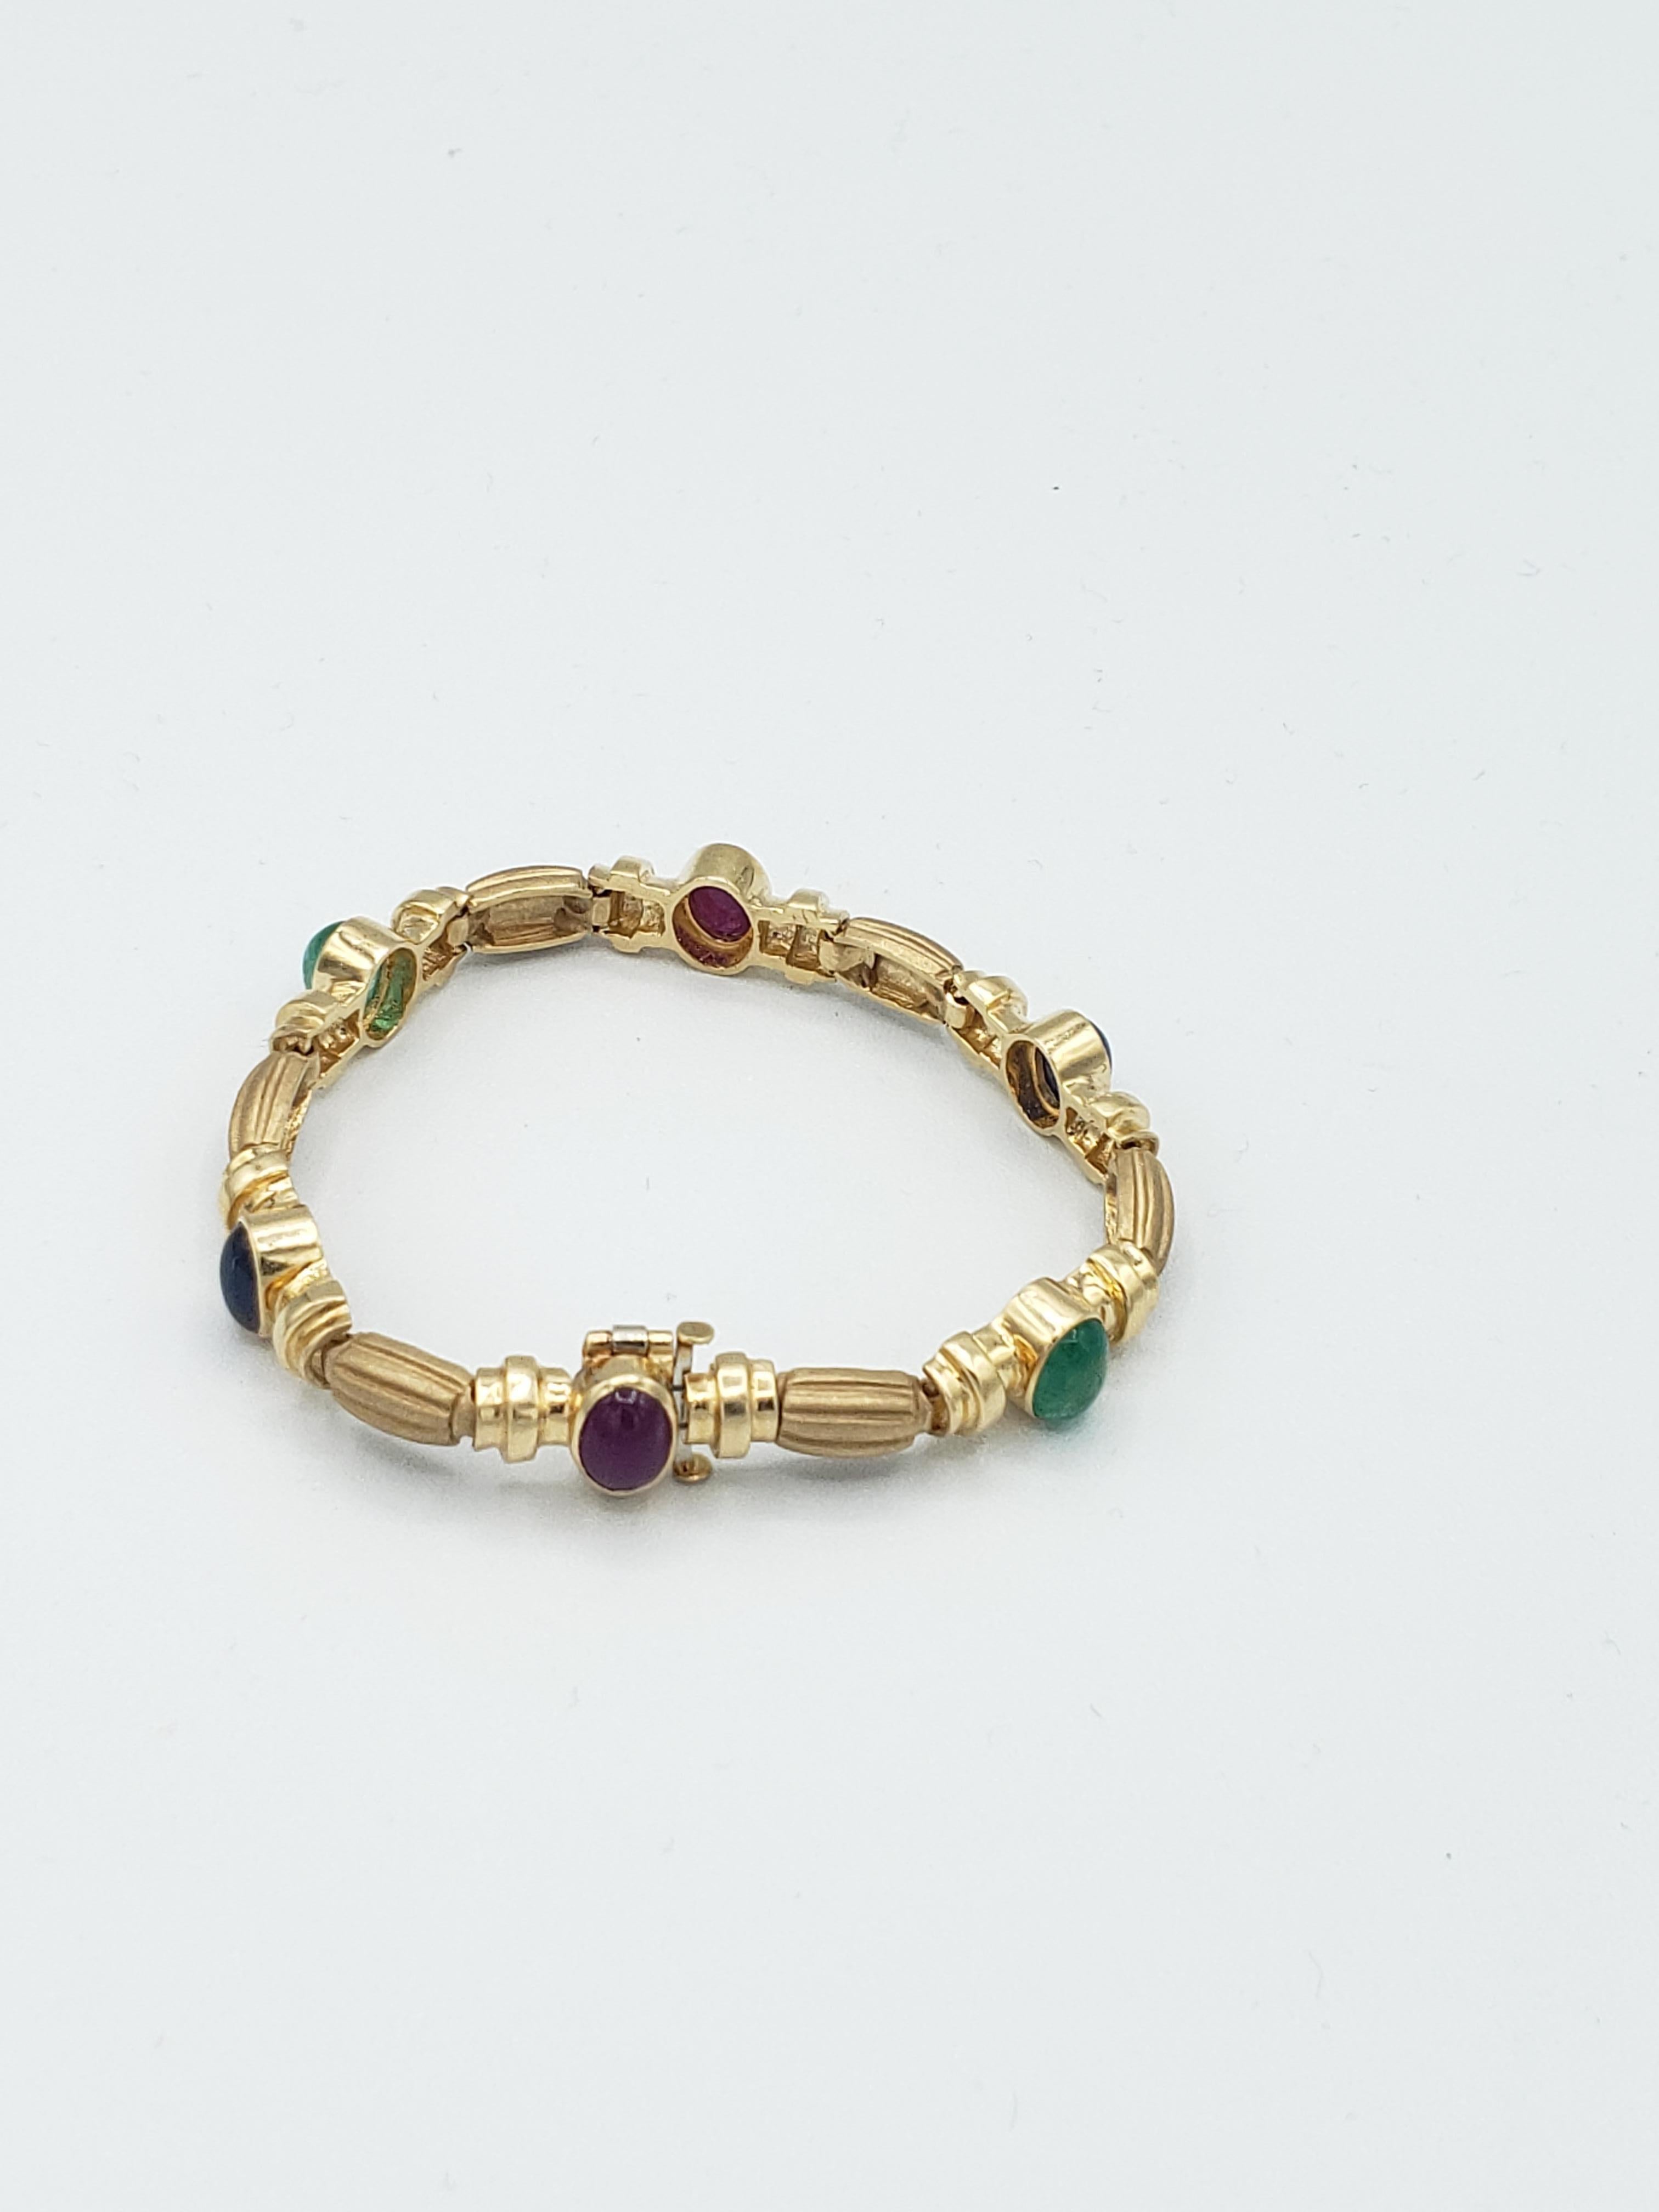 This exquisite bracelet by LaFrancee is crafted from 14k solid yellow gold and features stunning natural Rubies, Sapphires, and Emeralds. The Byzantine-style bracelet is a nod to nature with its intricate detailing and beautiful gemstones that evoke